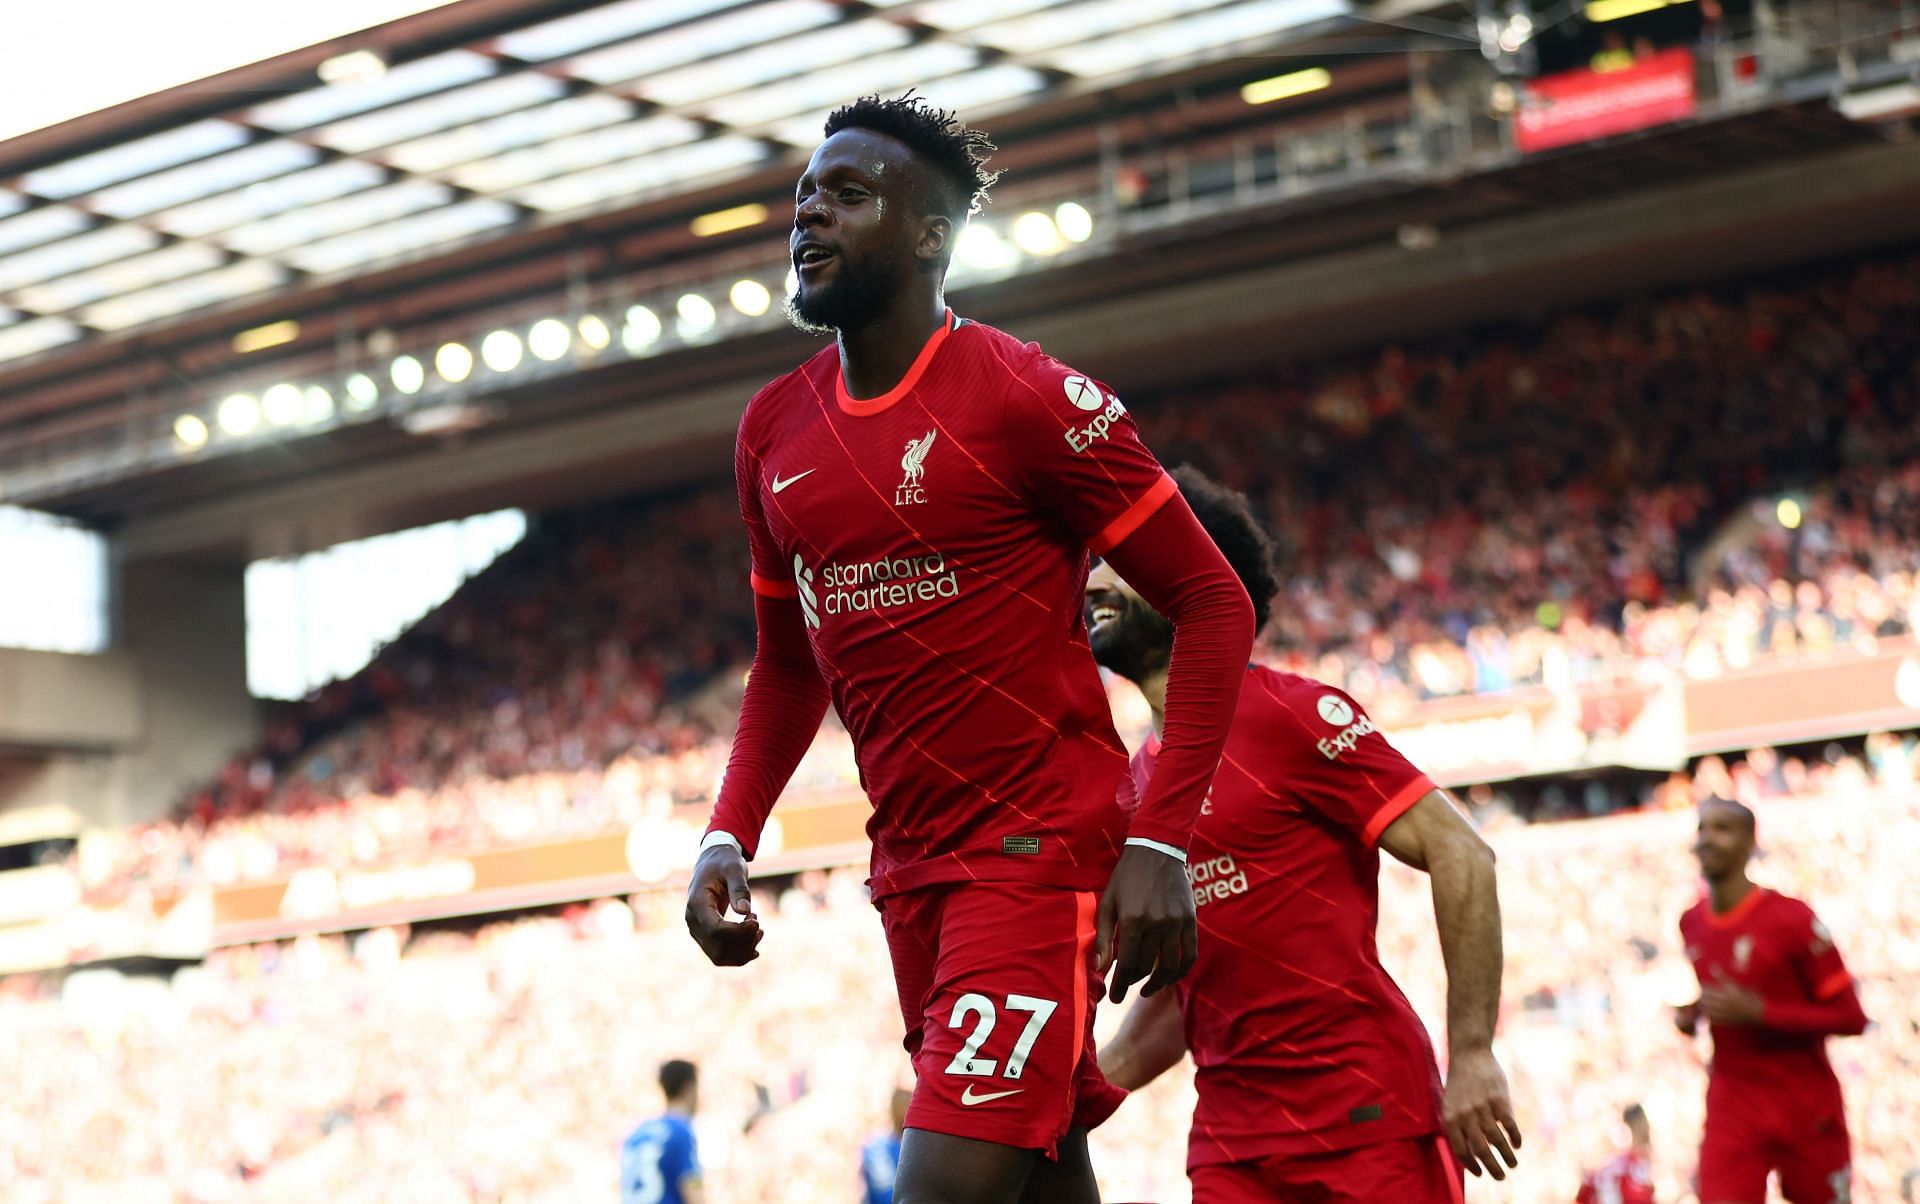 Divock Origi joined Liverpool after good performances in the 2014 FIFA World Cup